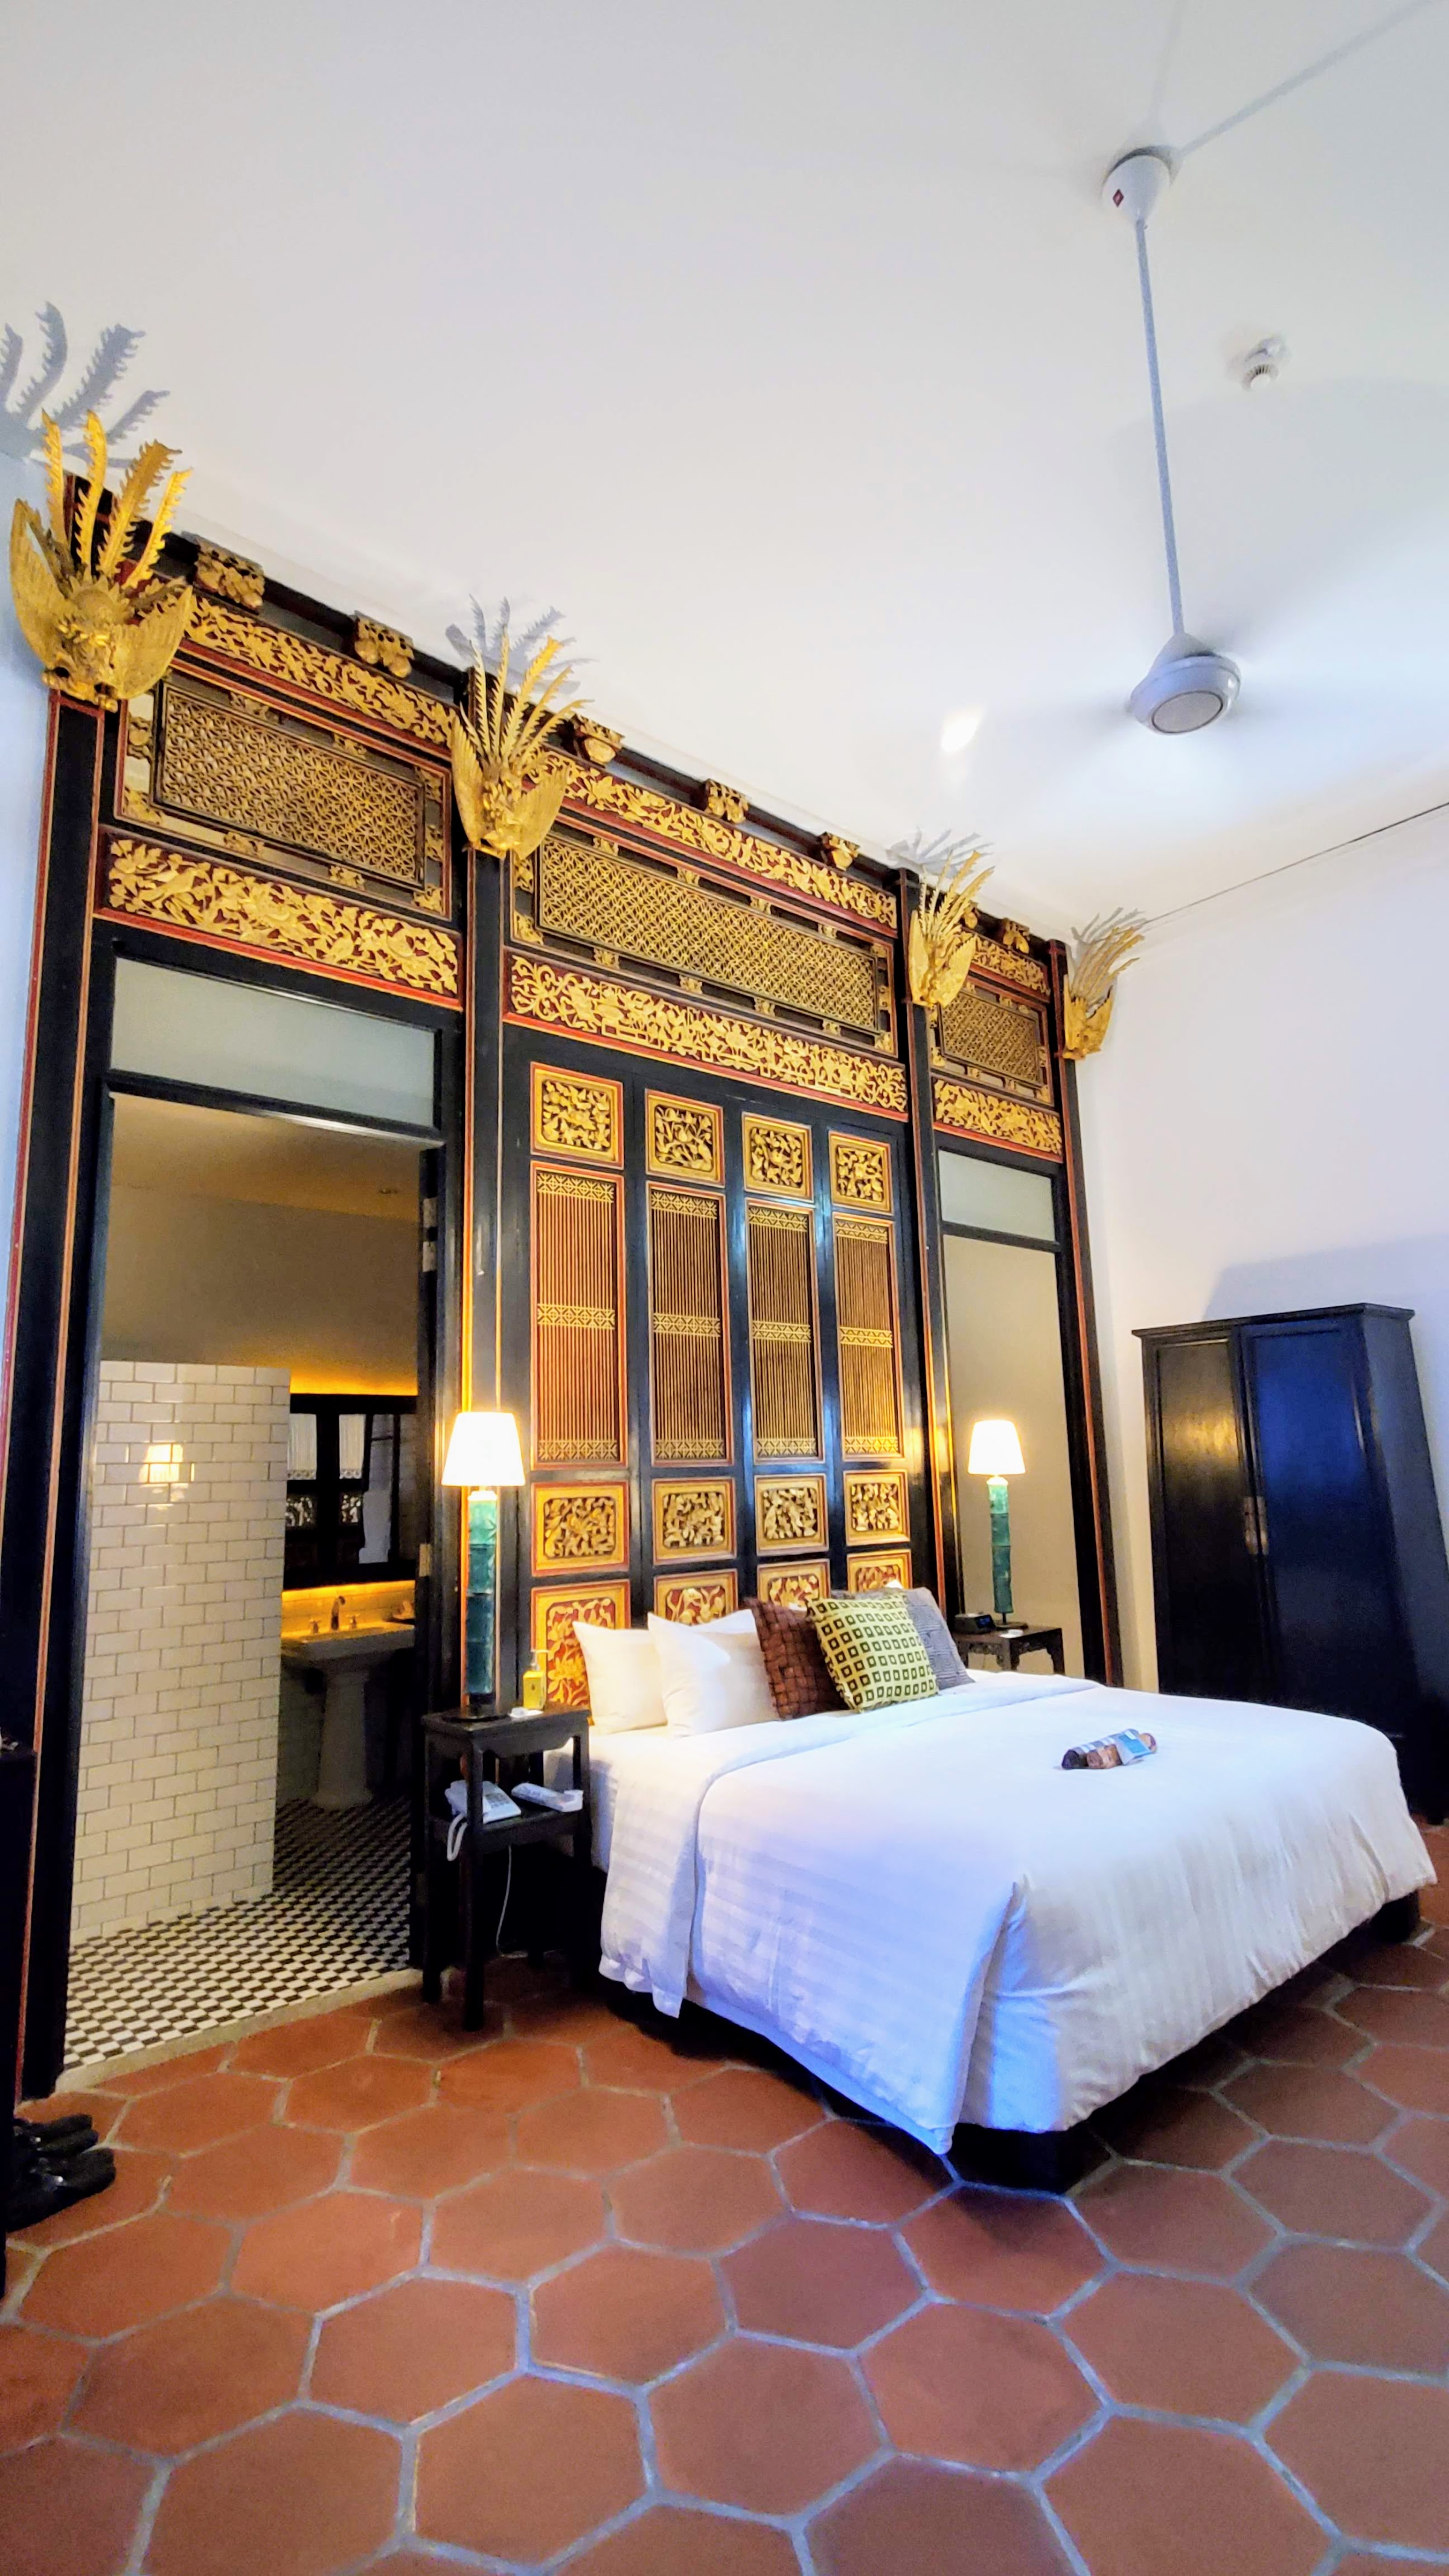 Staying at the Cheong Fatt Tze Blue Mansion in Penang